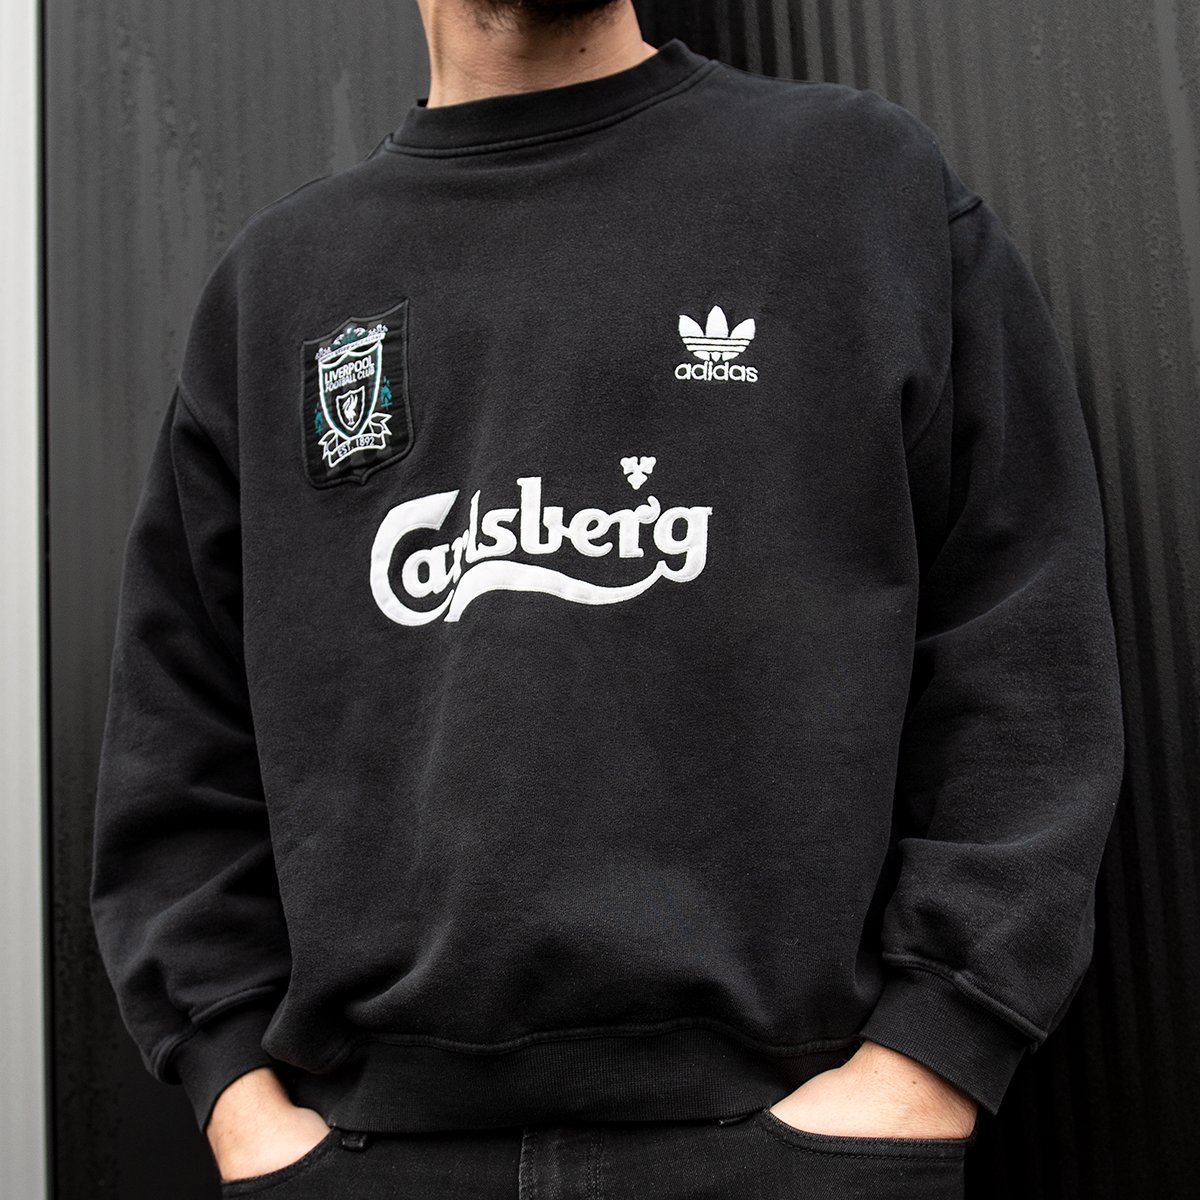 Classic Football Shirts on Twitter: "Liverpool 1995 Sweat Top by Adidas 🔥 Dropping onto the site the New Year! https://t.co/yLSfhEf1yJ" / Twitter